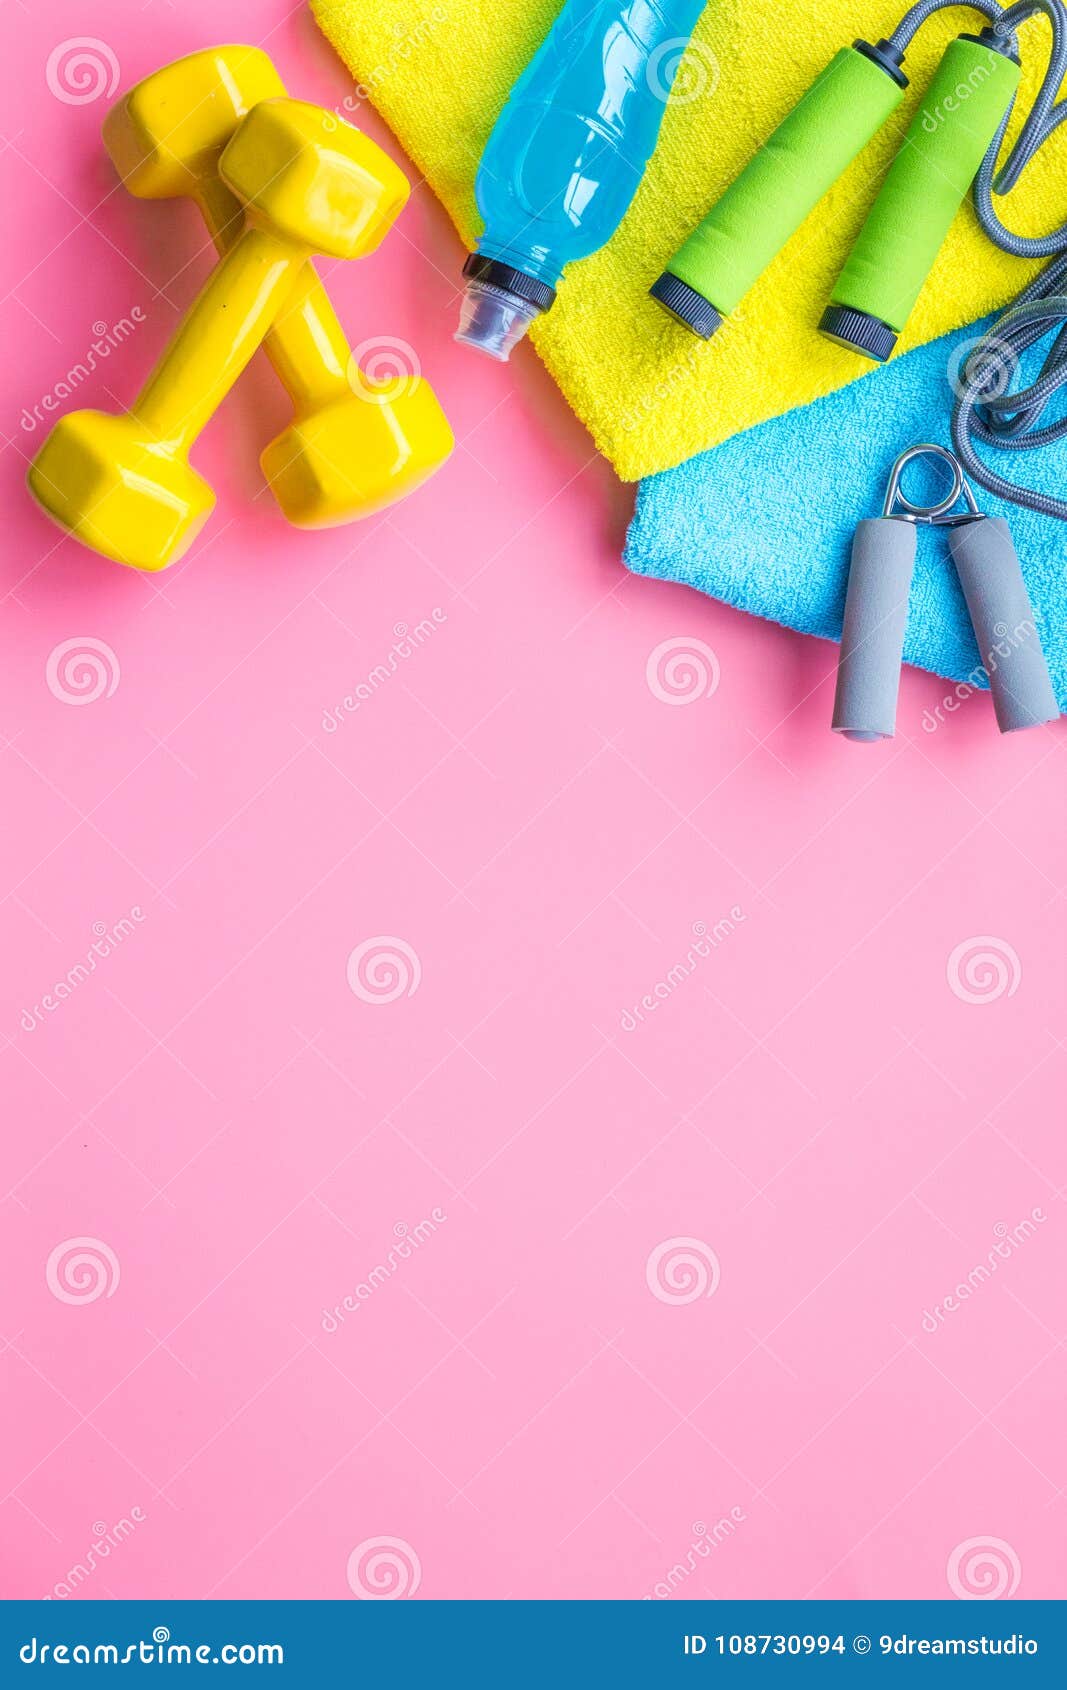 https://thumbs.dreamstime.com/z/fitness-background-equipment-gym-home-jump-rope-dumbbells-expander-water-pastel-pink-top-view-108730994.jpg